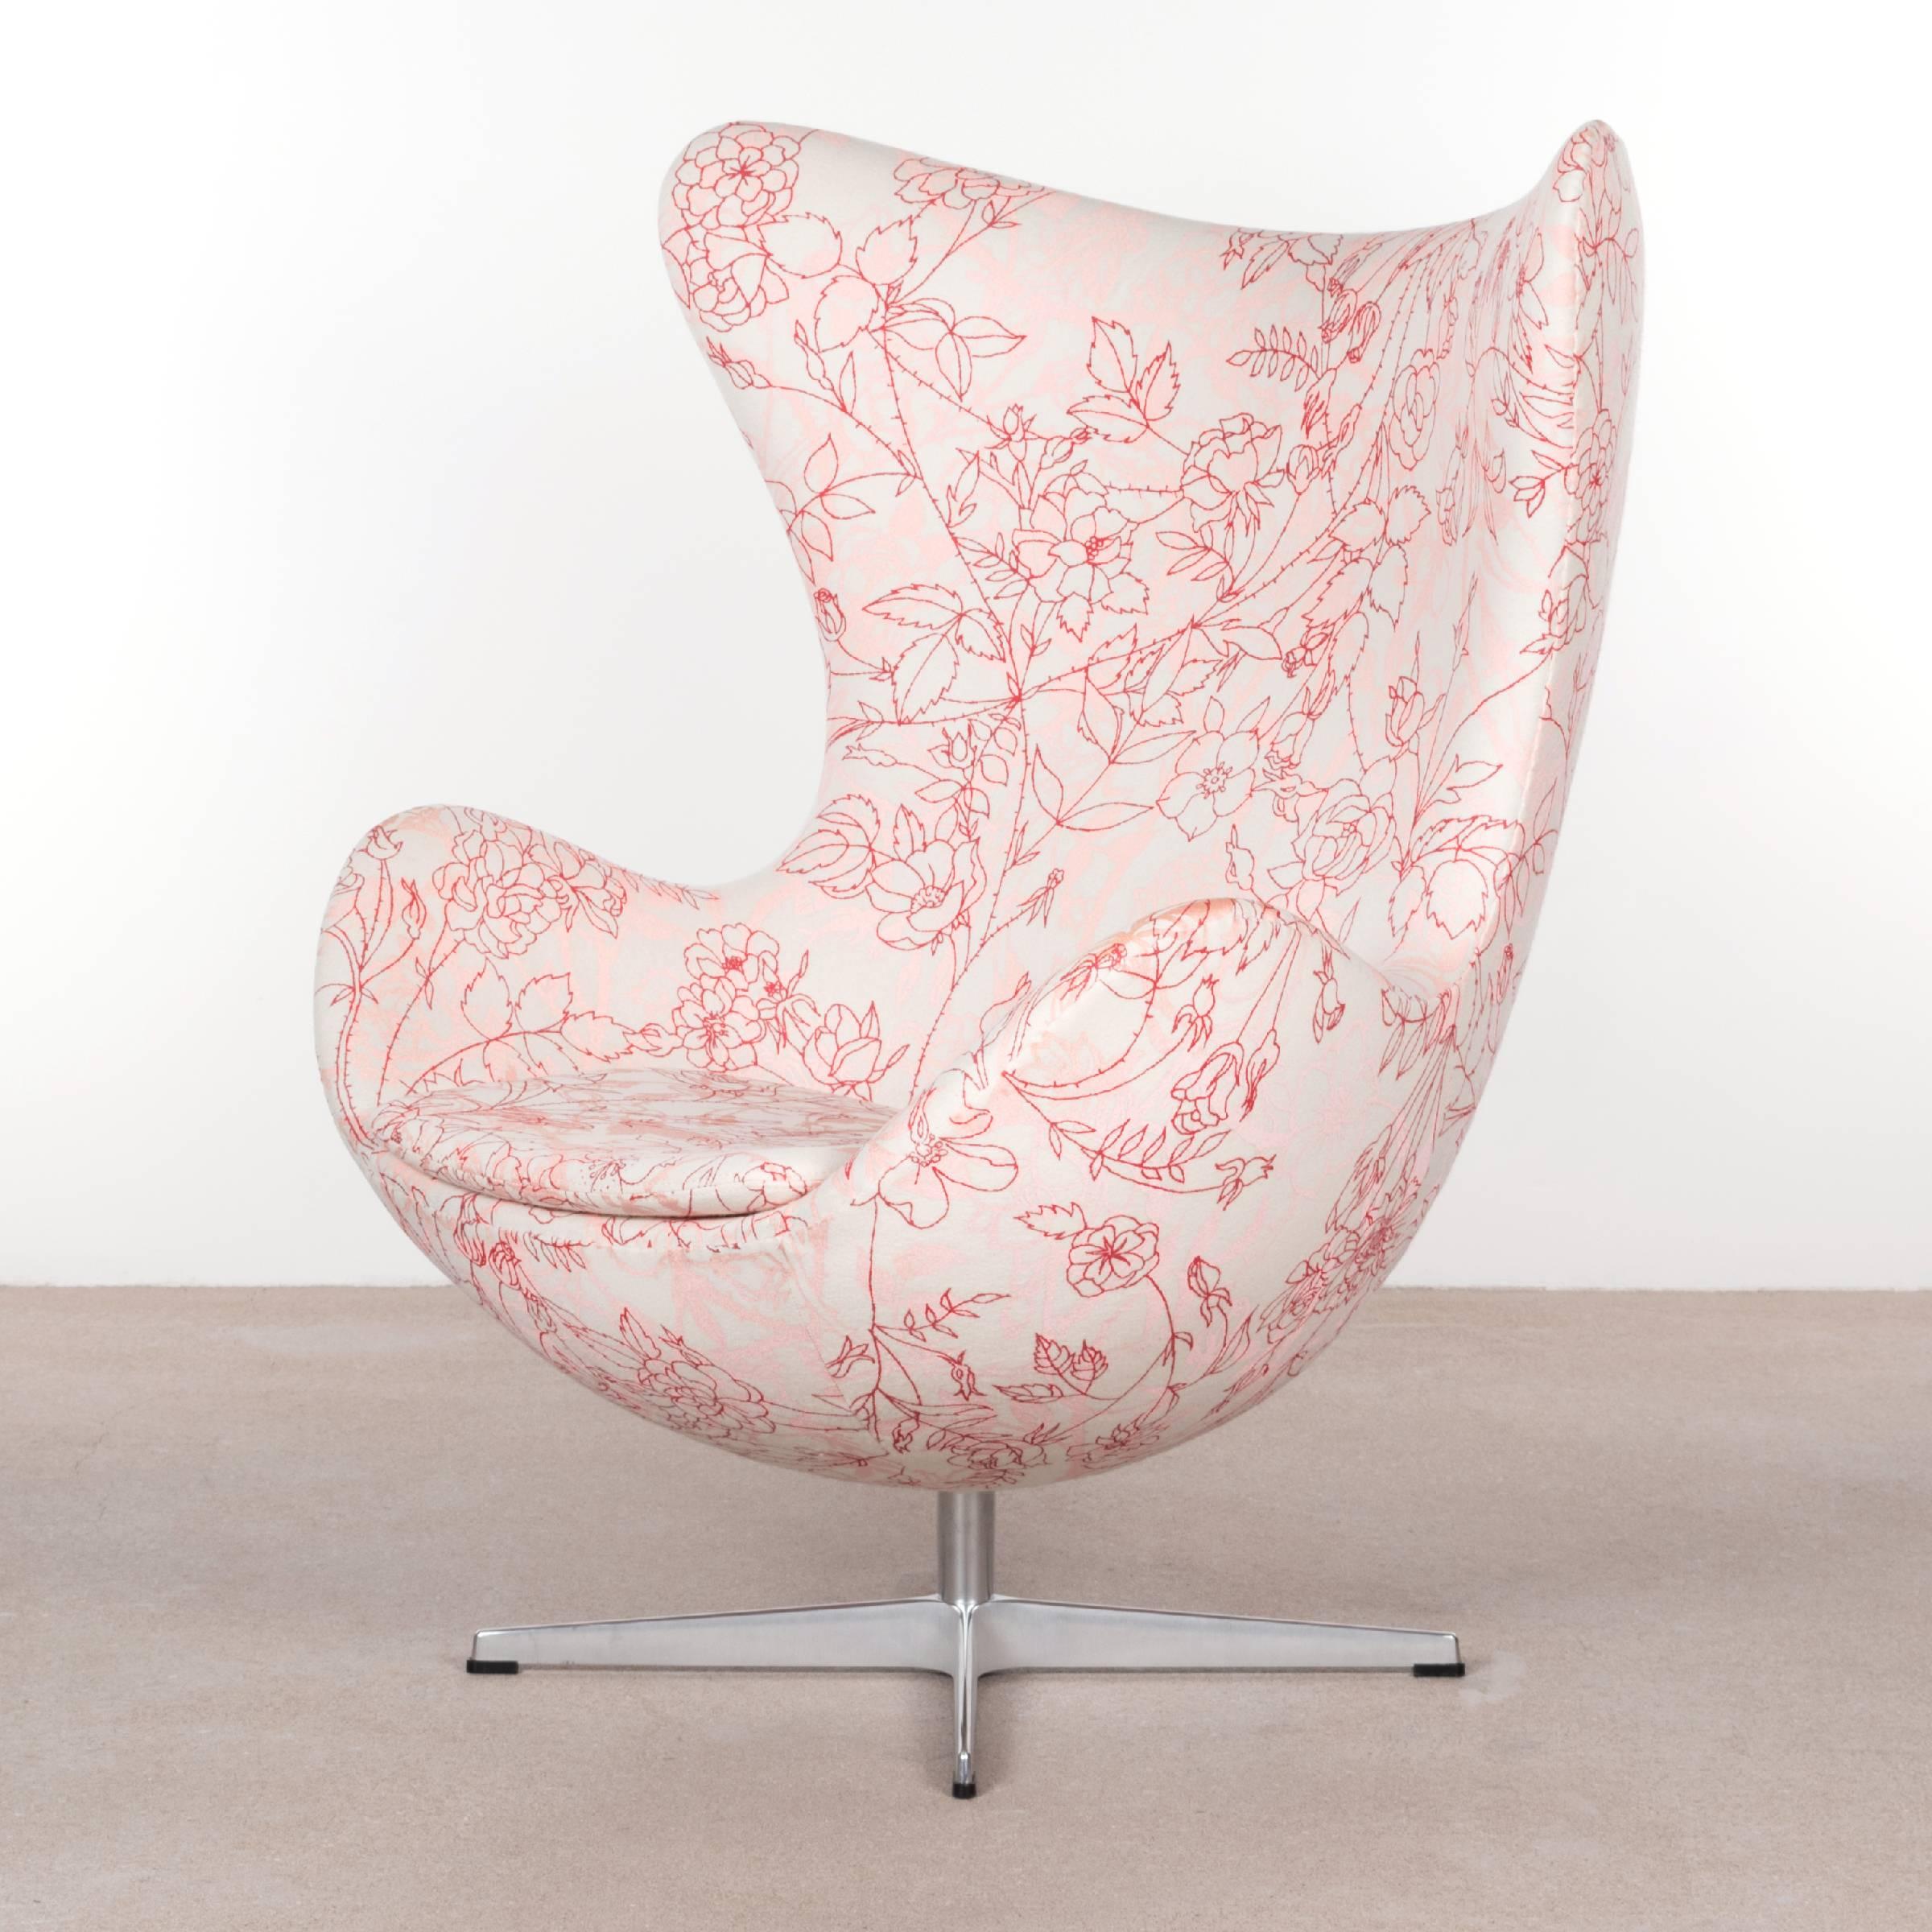 Iconic and comfortable egg chair by Arne Jacobsen for Fritz Hansen. Fabric with rose motiv in red and pink accents (Kvadrat Happy KL 106 Tord Boontje). Polished aluminum base with swivel and tilt mechanism. All in very good original condition.